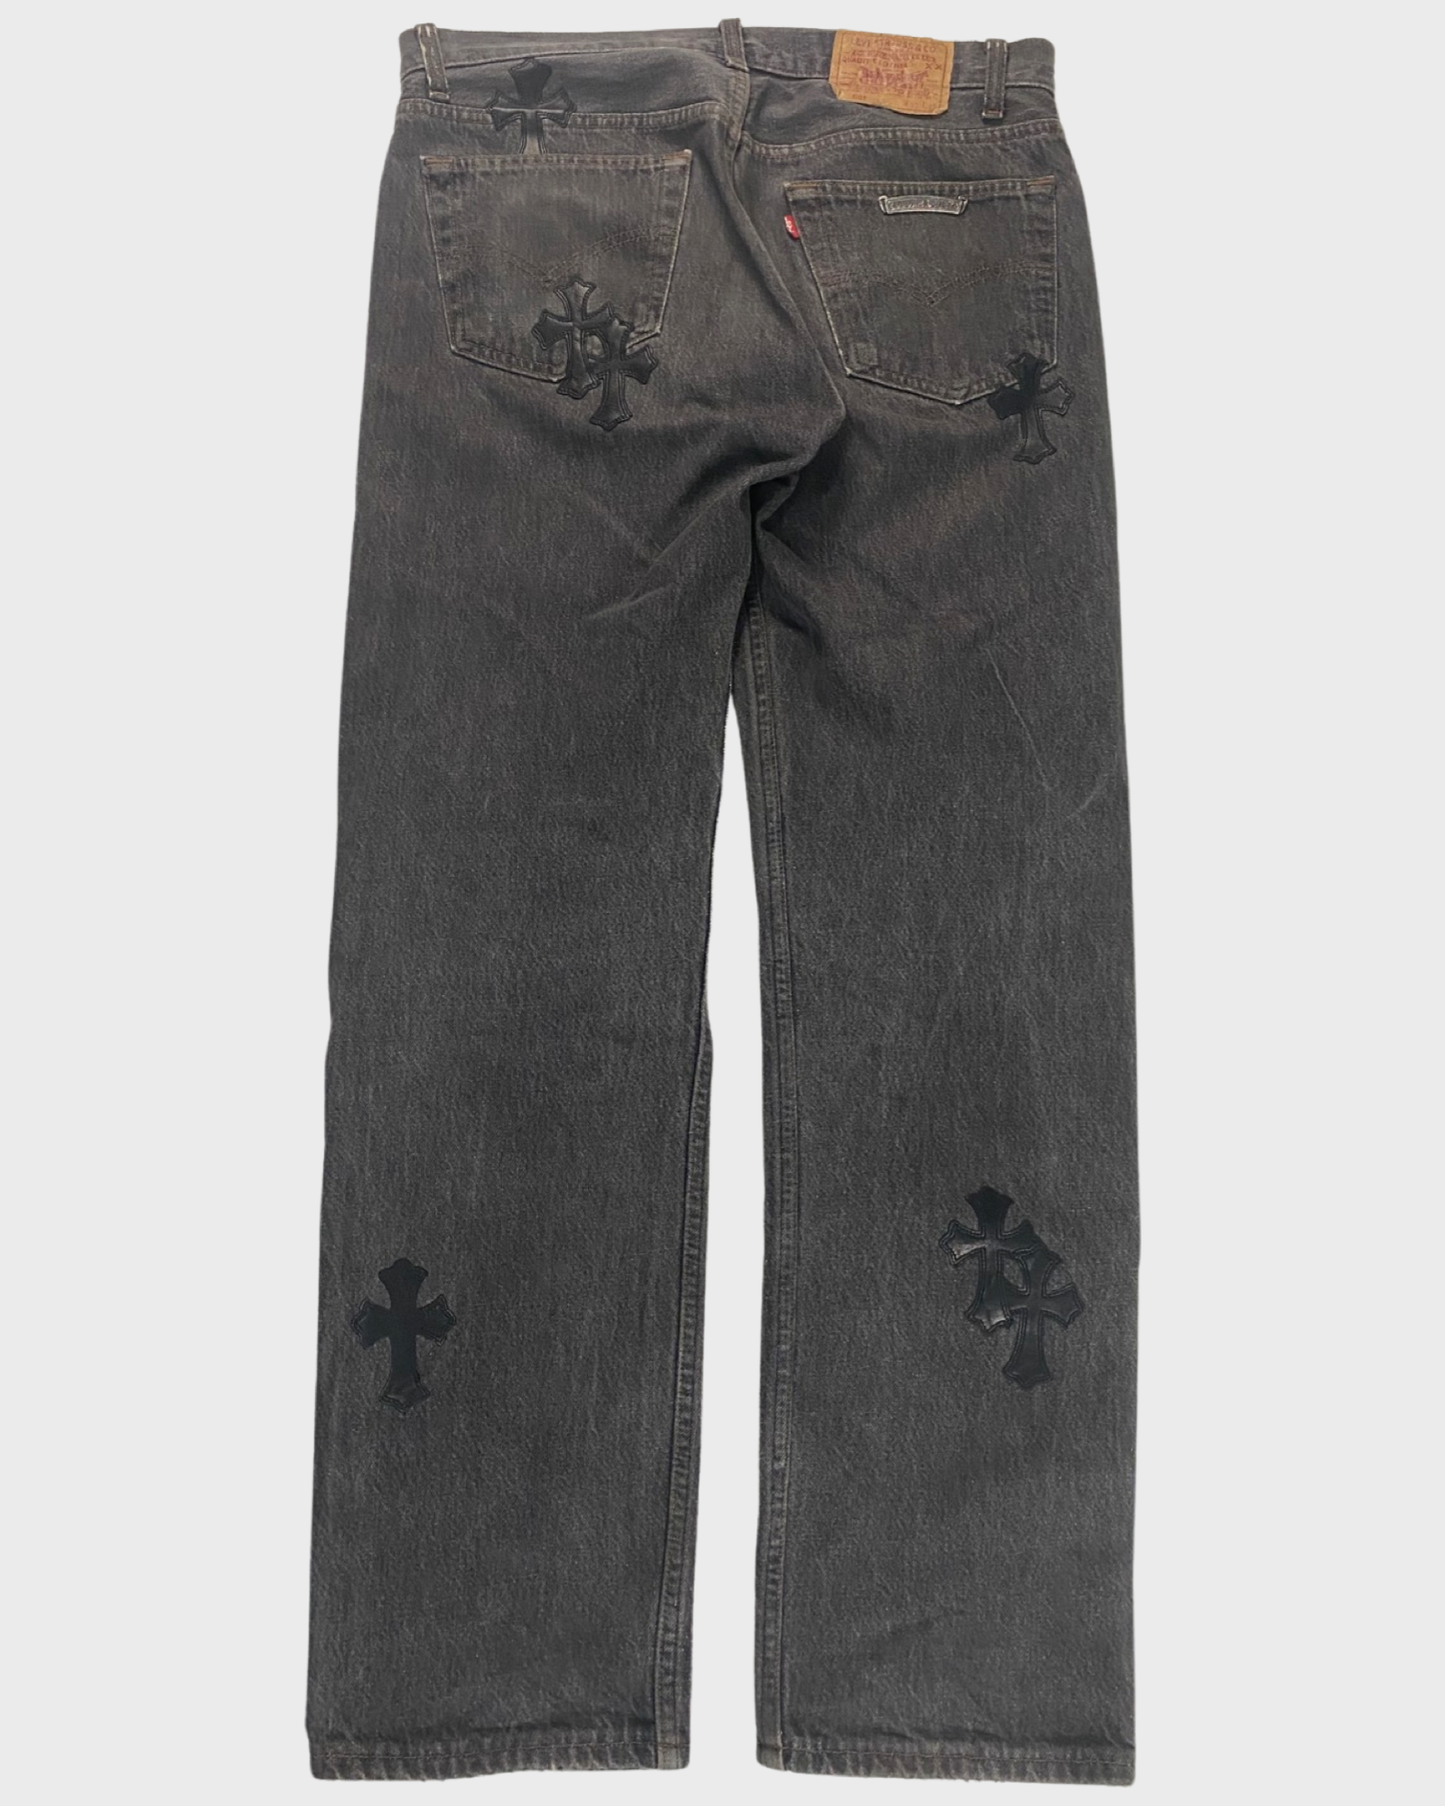 Chrome Hearts Cross Patch Jeans